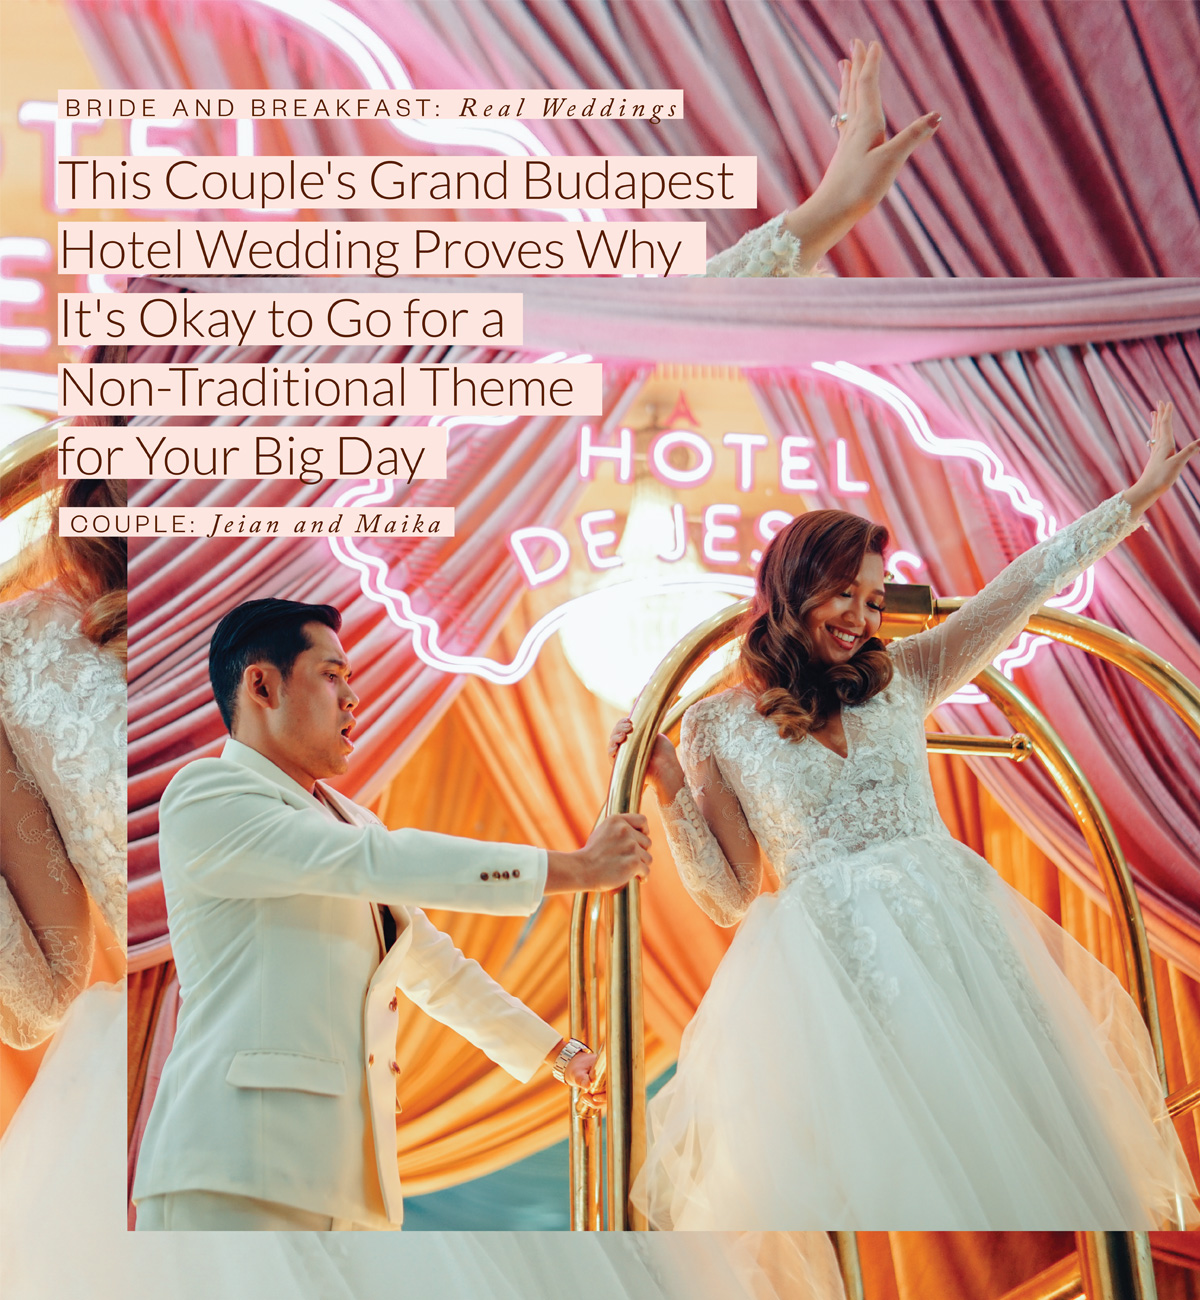 This Couple's Grand Budapest Hotel Wedding Proves Why It's Okay to Go for a Non-Traditional Theme for Your Big Day